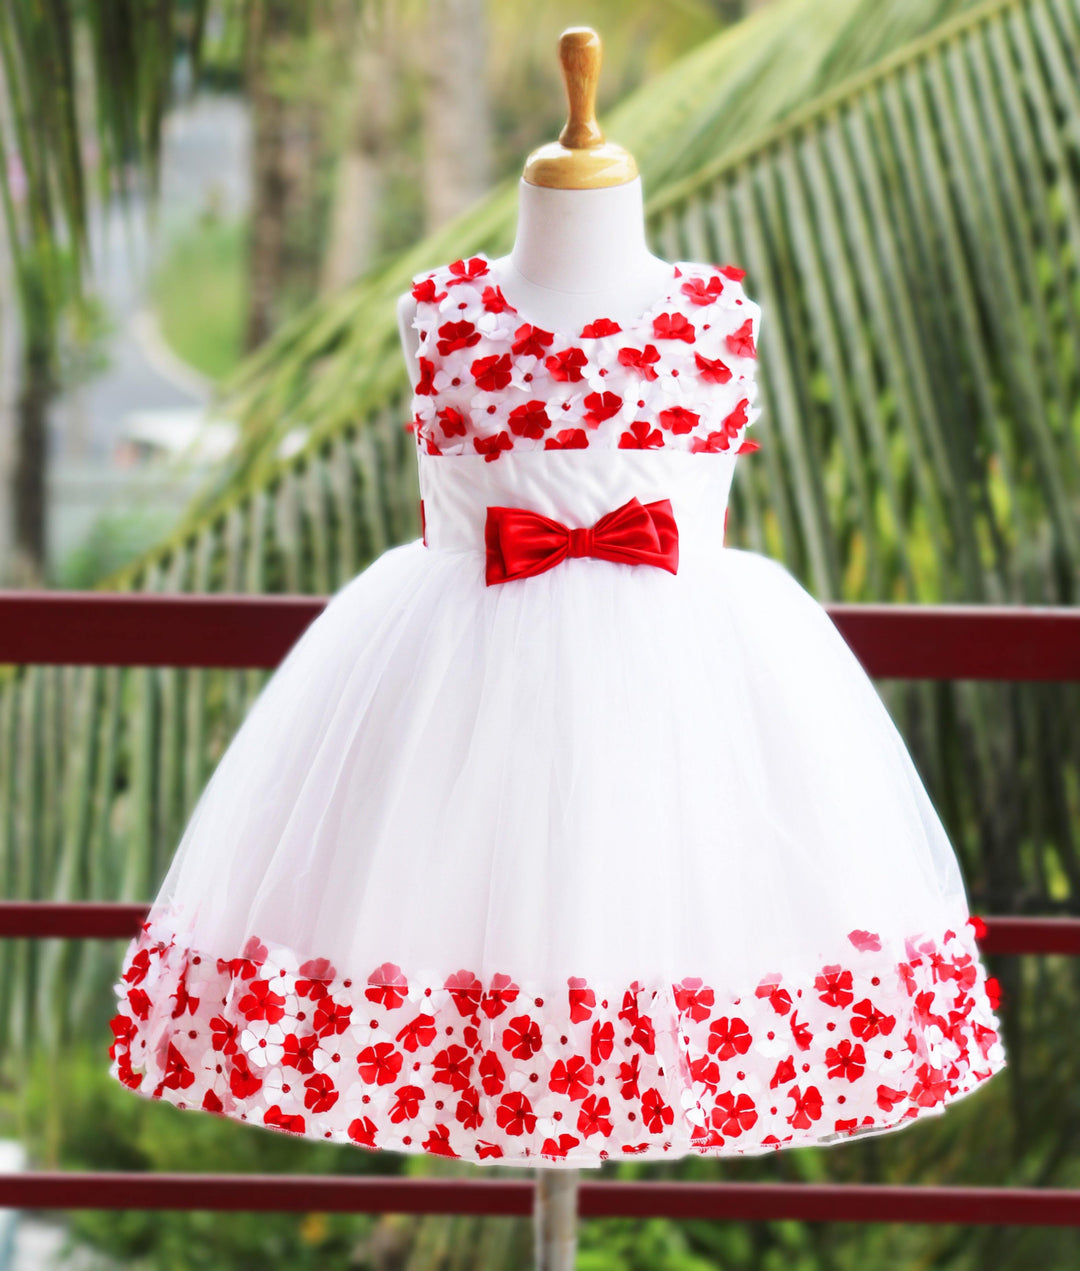 White and Red Combo Sleeveless Flower Embroidered Frock (6months-8 Years) - Stanwells Kids